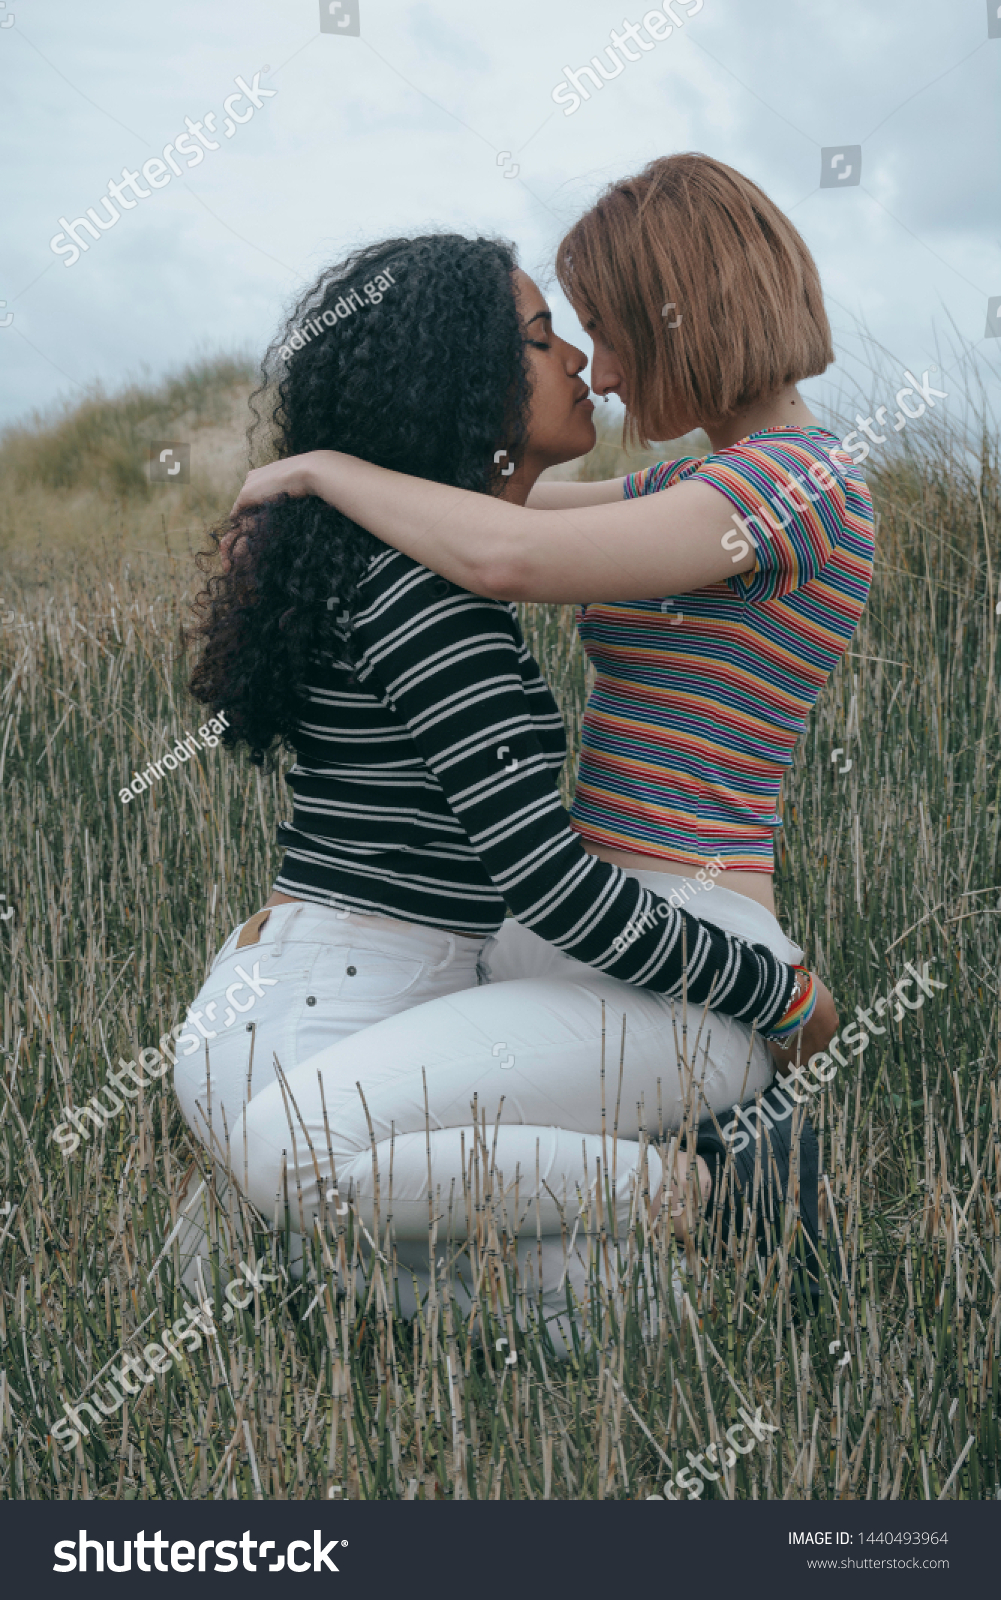 lesbians kissing each other hd photo